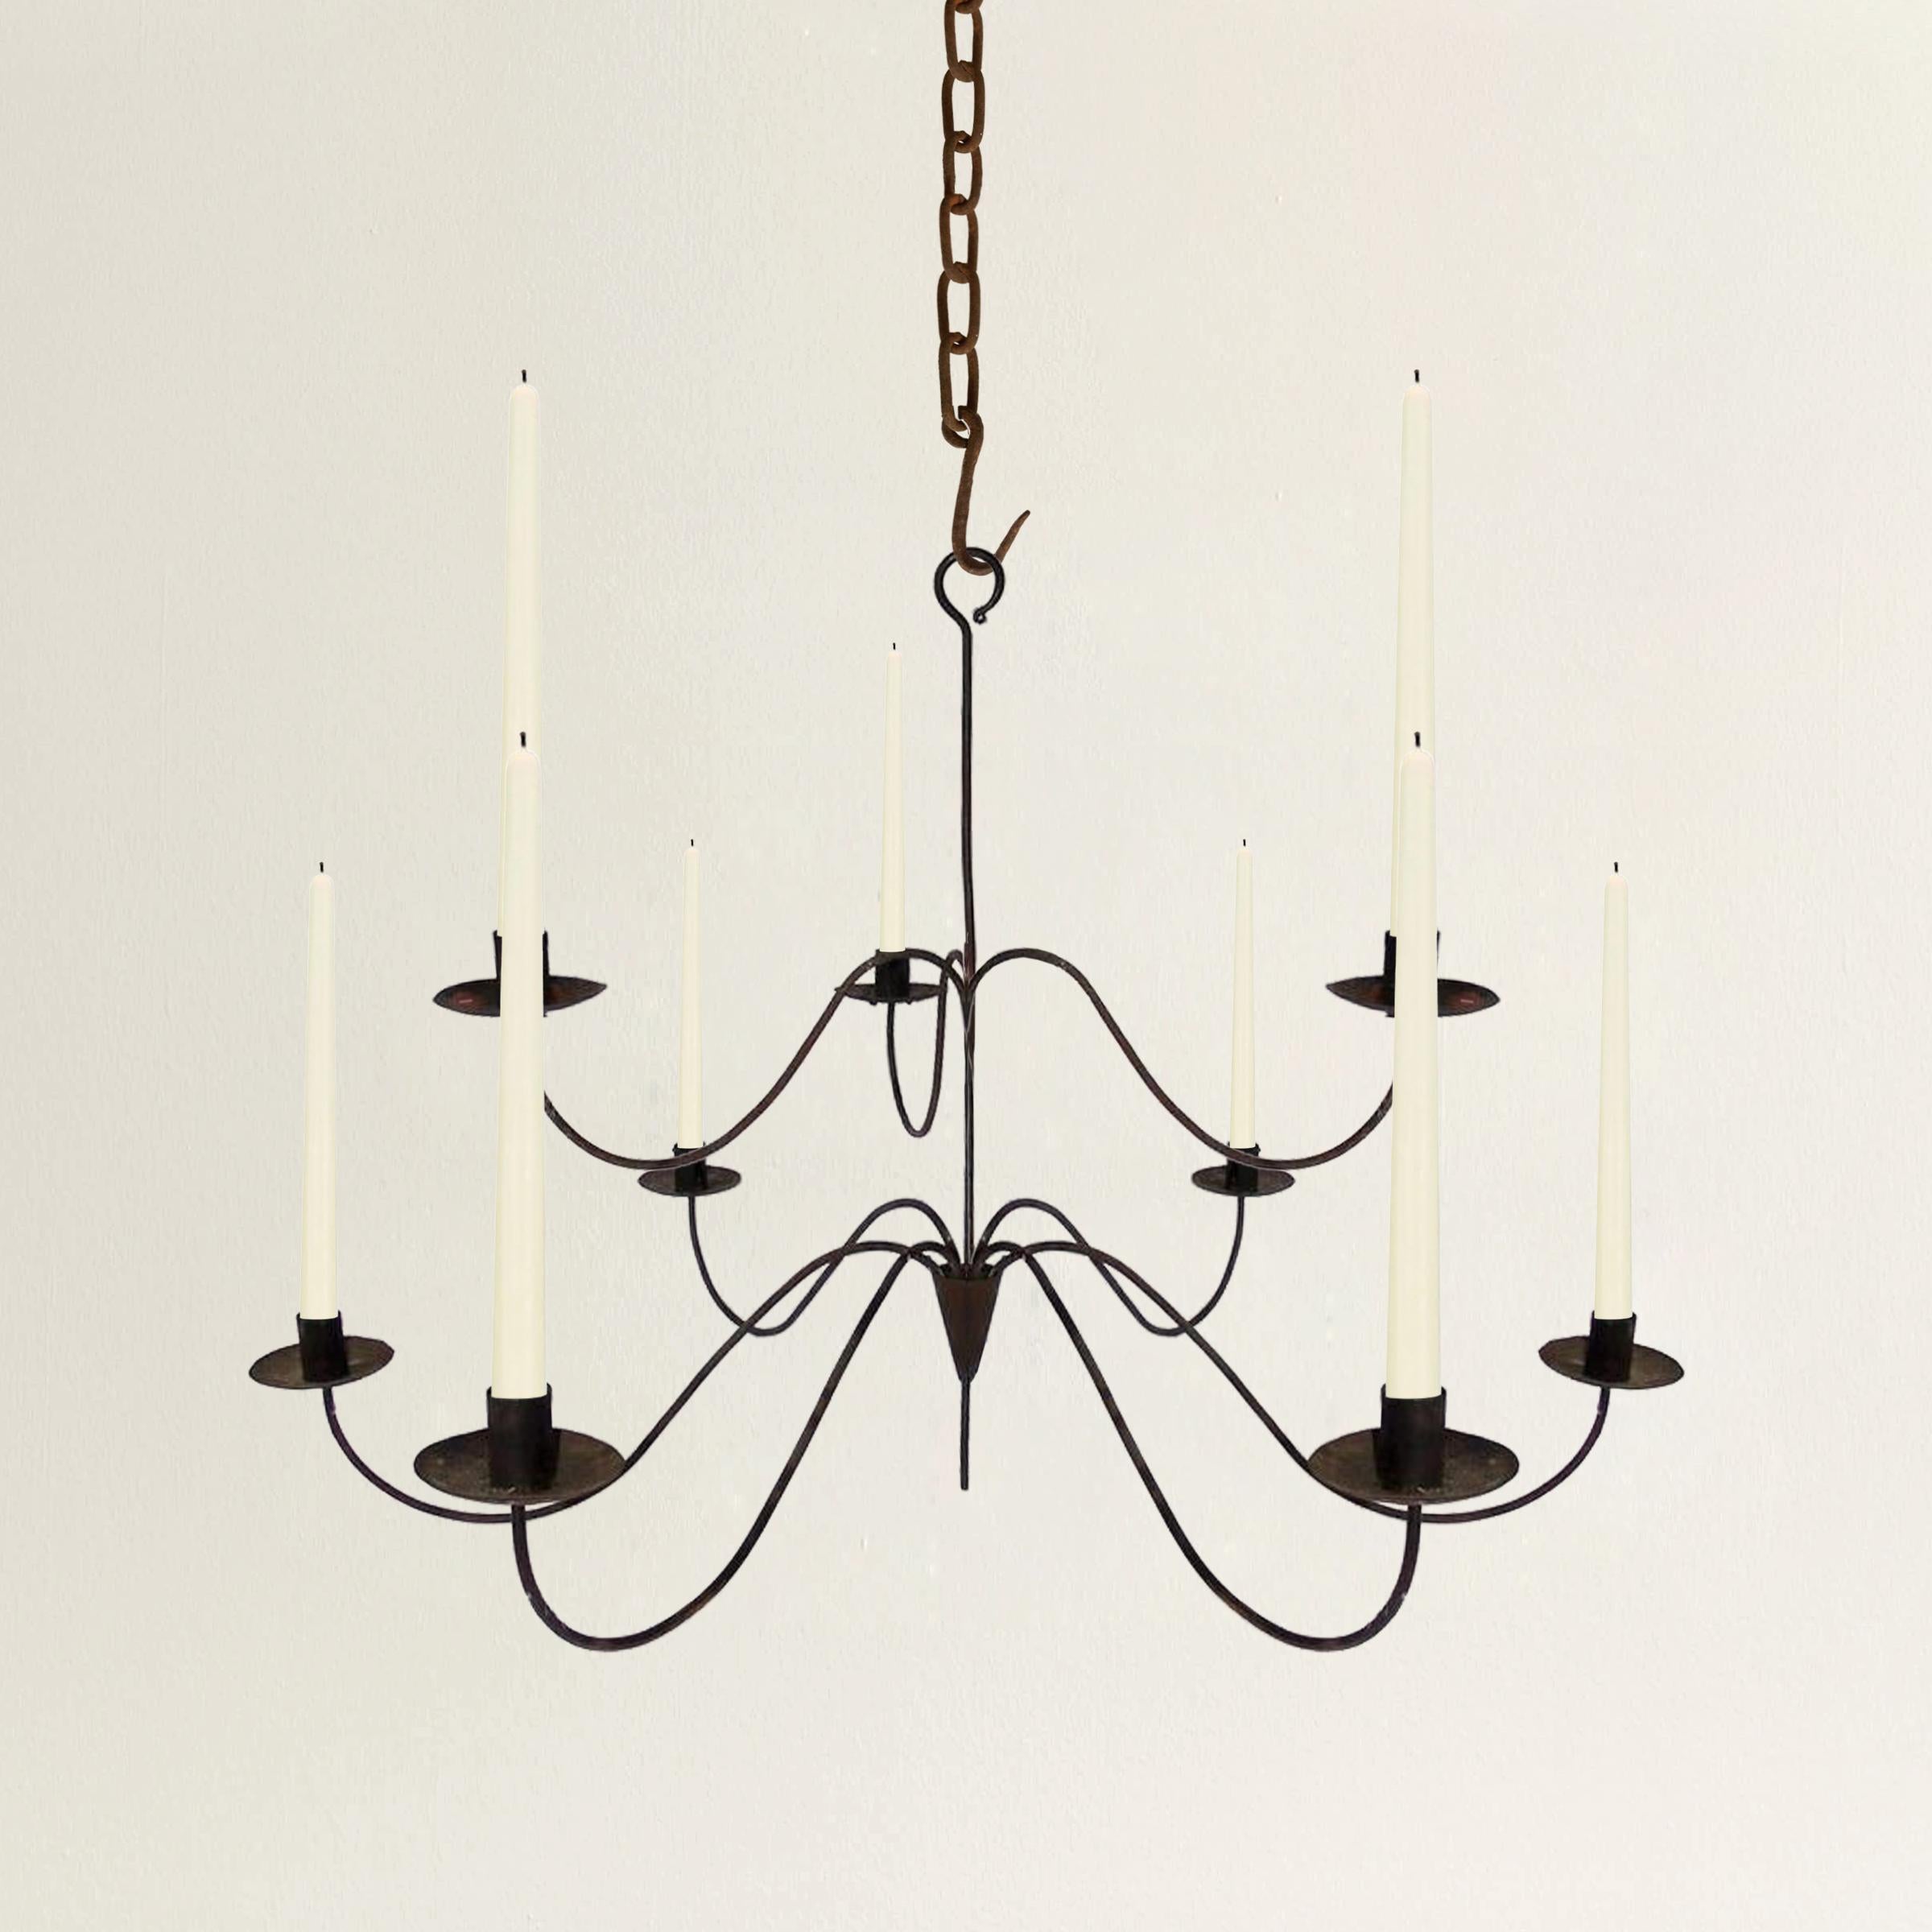 A whimsical 19th century American wrought iron chandelier with nine scrolled arms, consisting of six in a circle on the bottom tier, and three around the top tier. The fixture originally used candles, and has never been electrified.